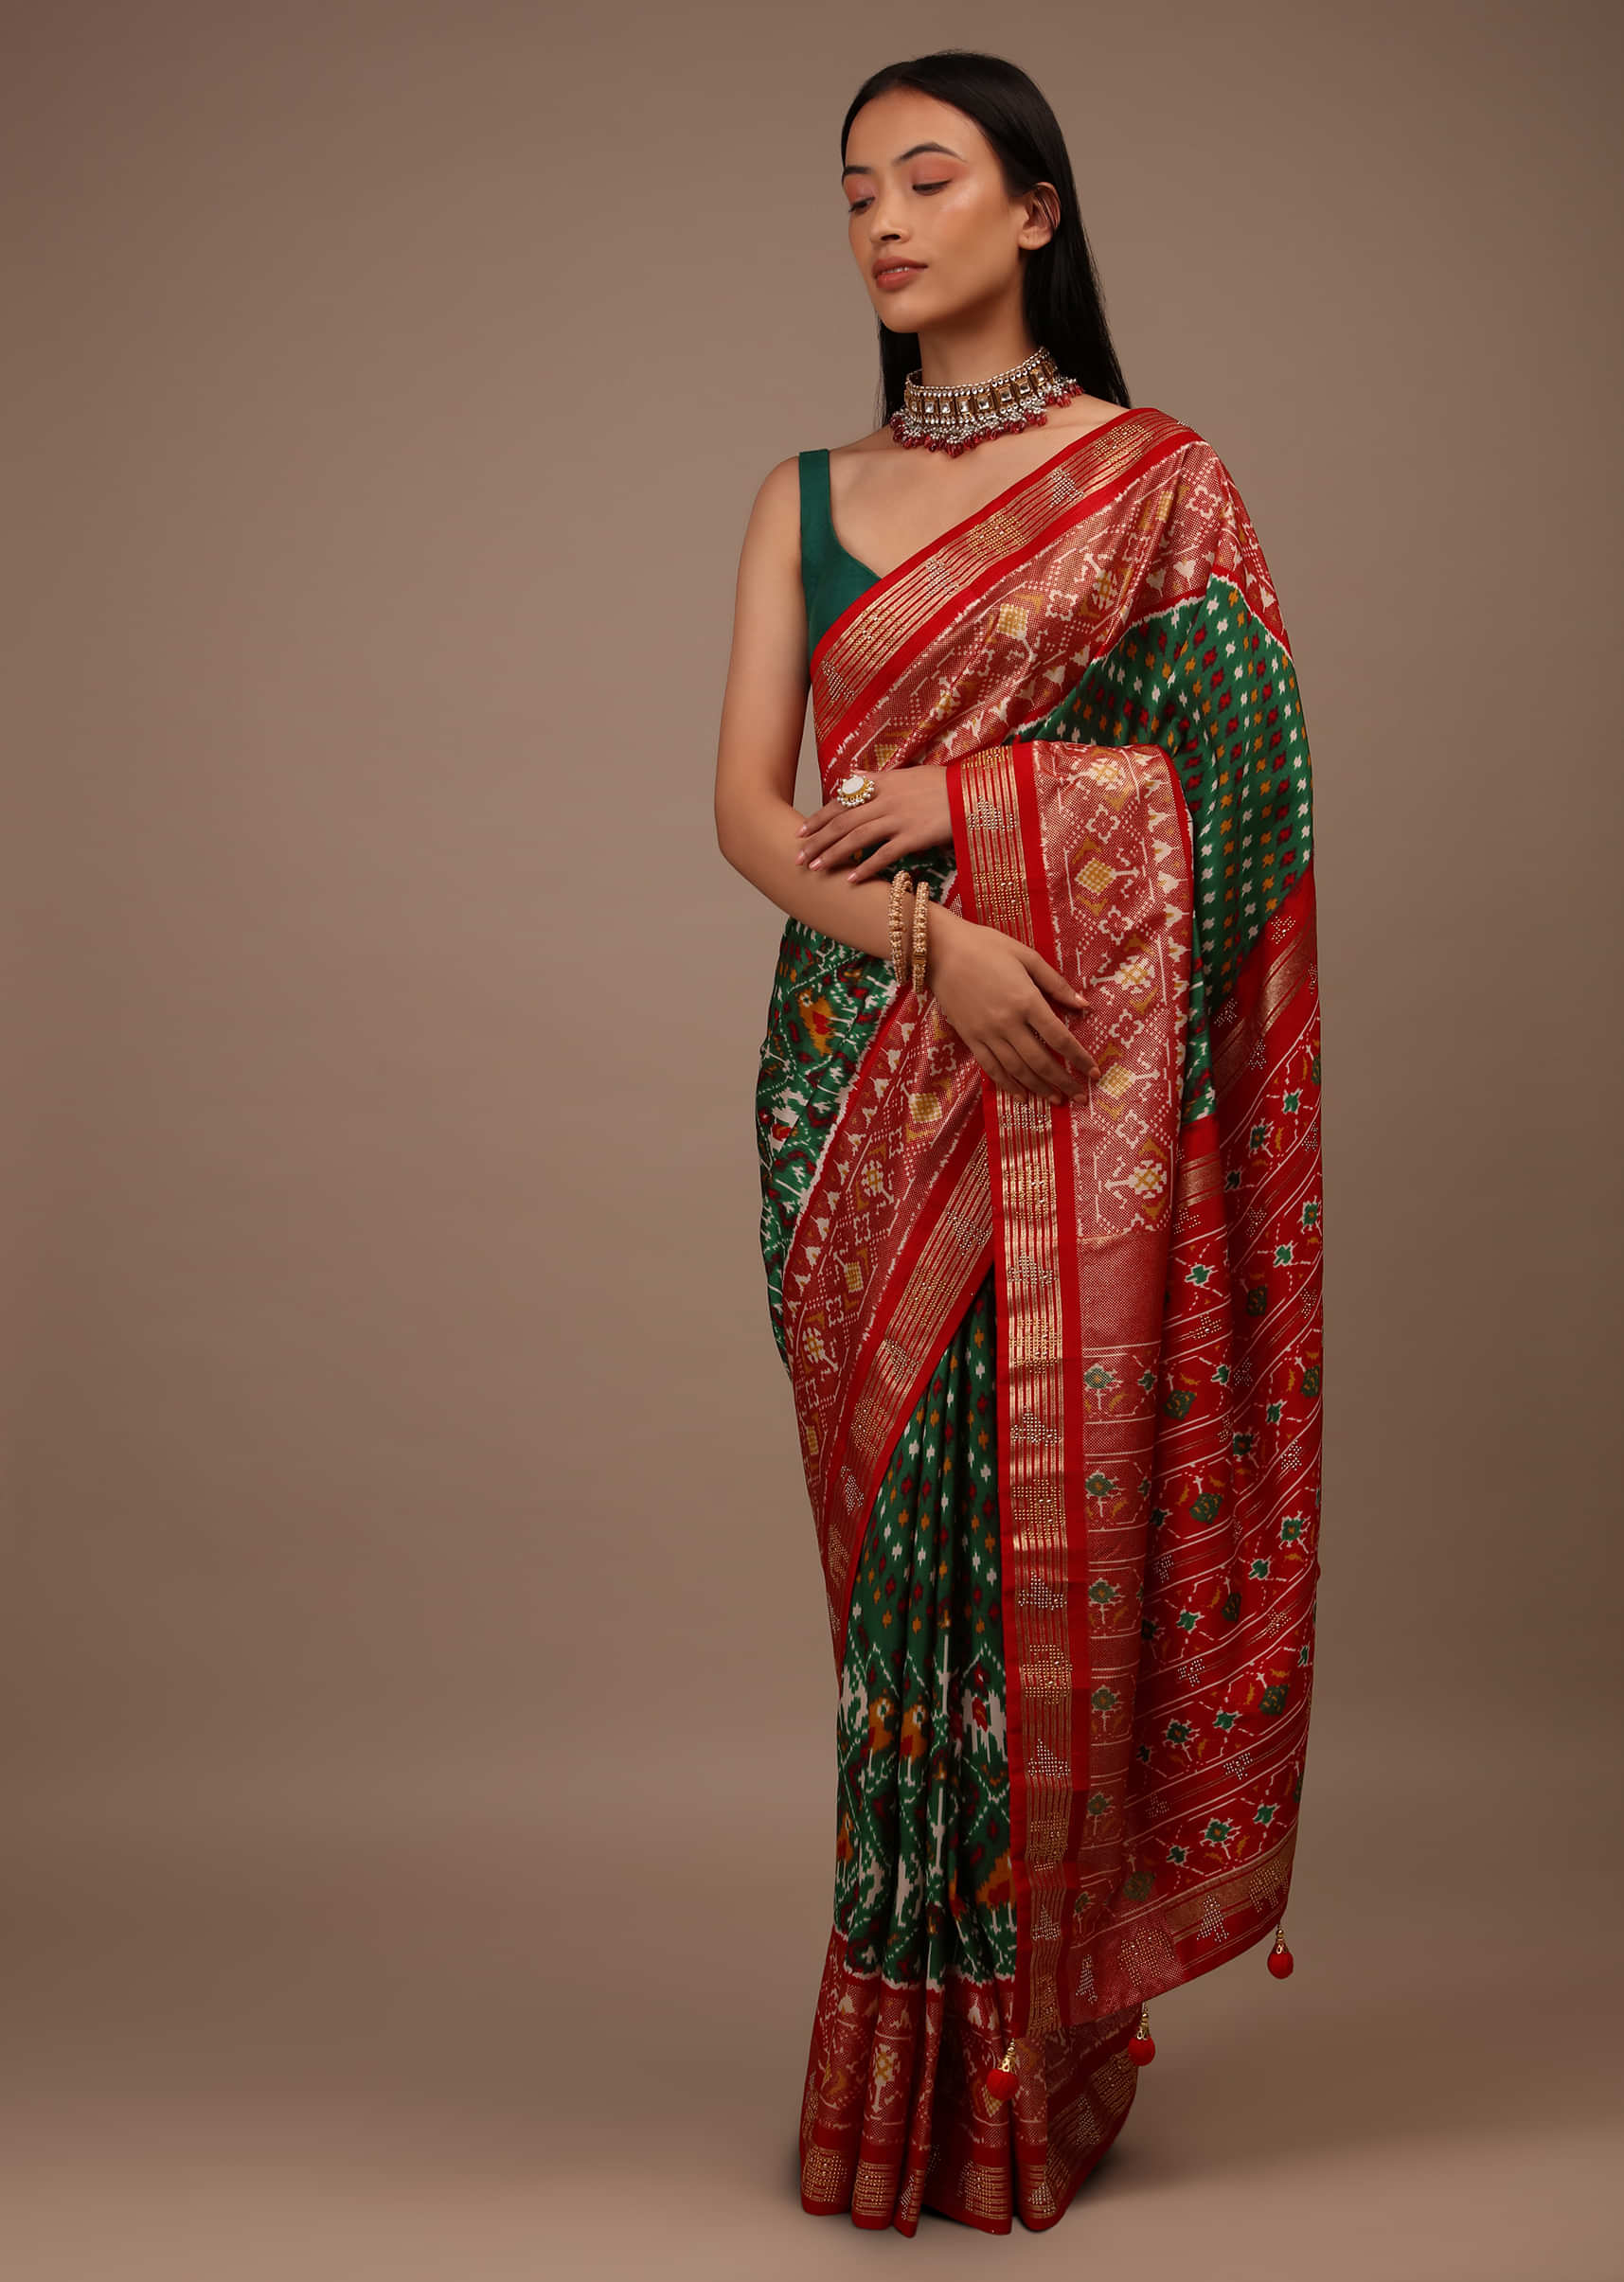 Bottle Green Saree In Silk With Multi Colored Patola And Foil Print And Contrasting Red Border